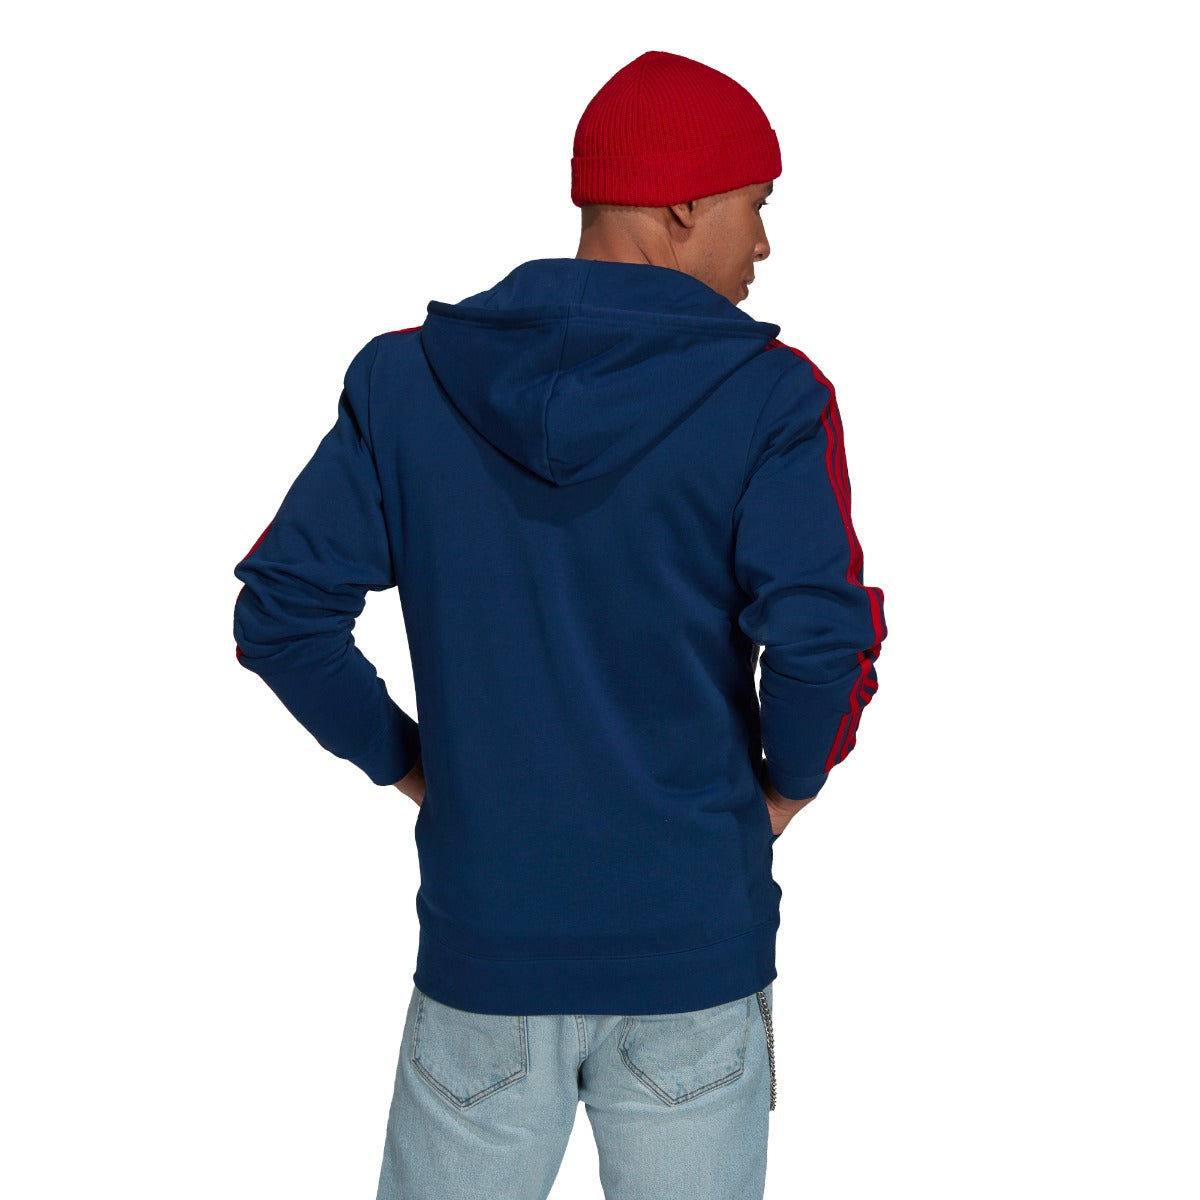 Arsenal Hooded Jacket 2021/2022 - Blue/Red